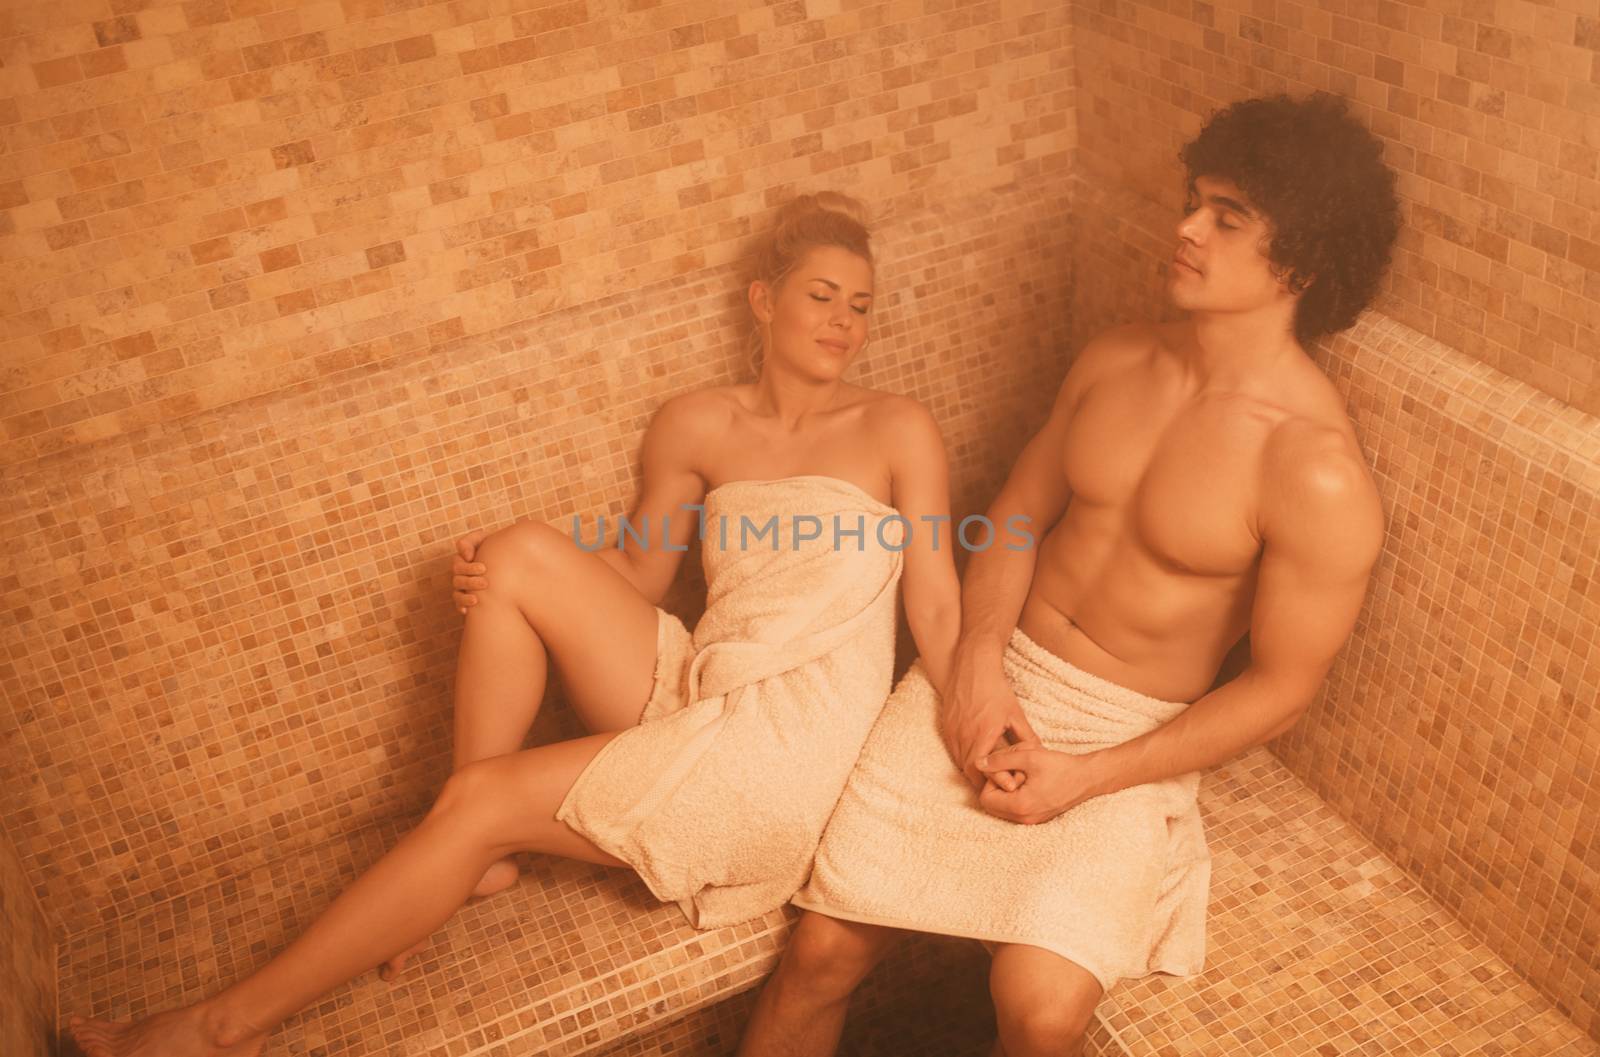 Couple At The Spa by MilanMarkovic78